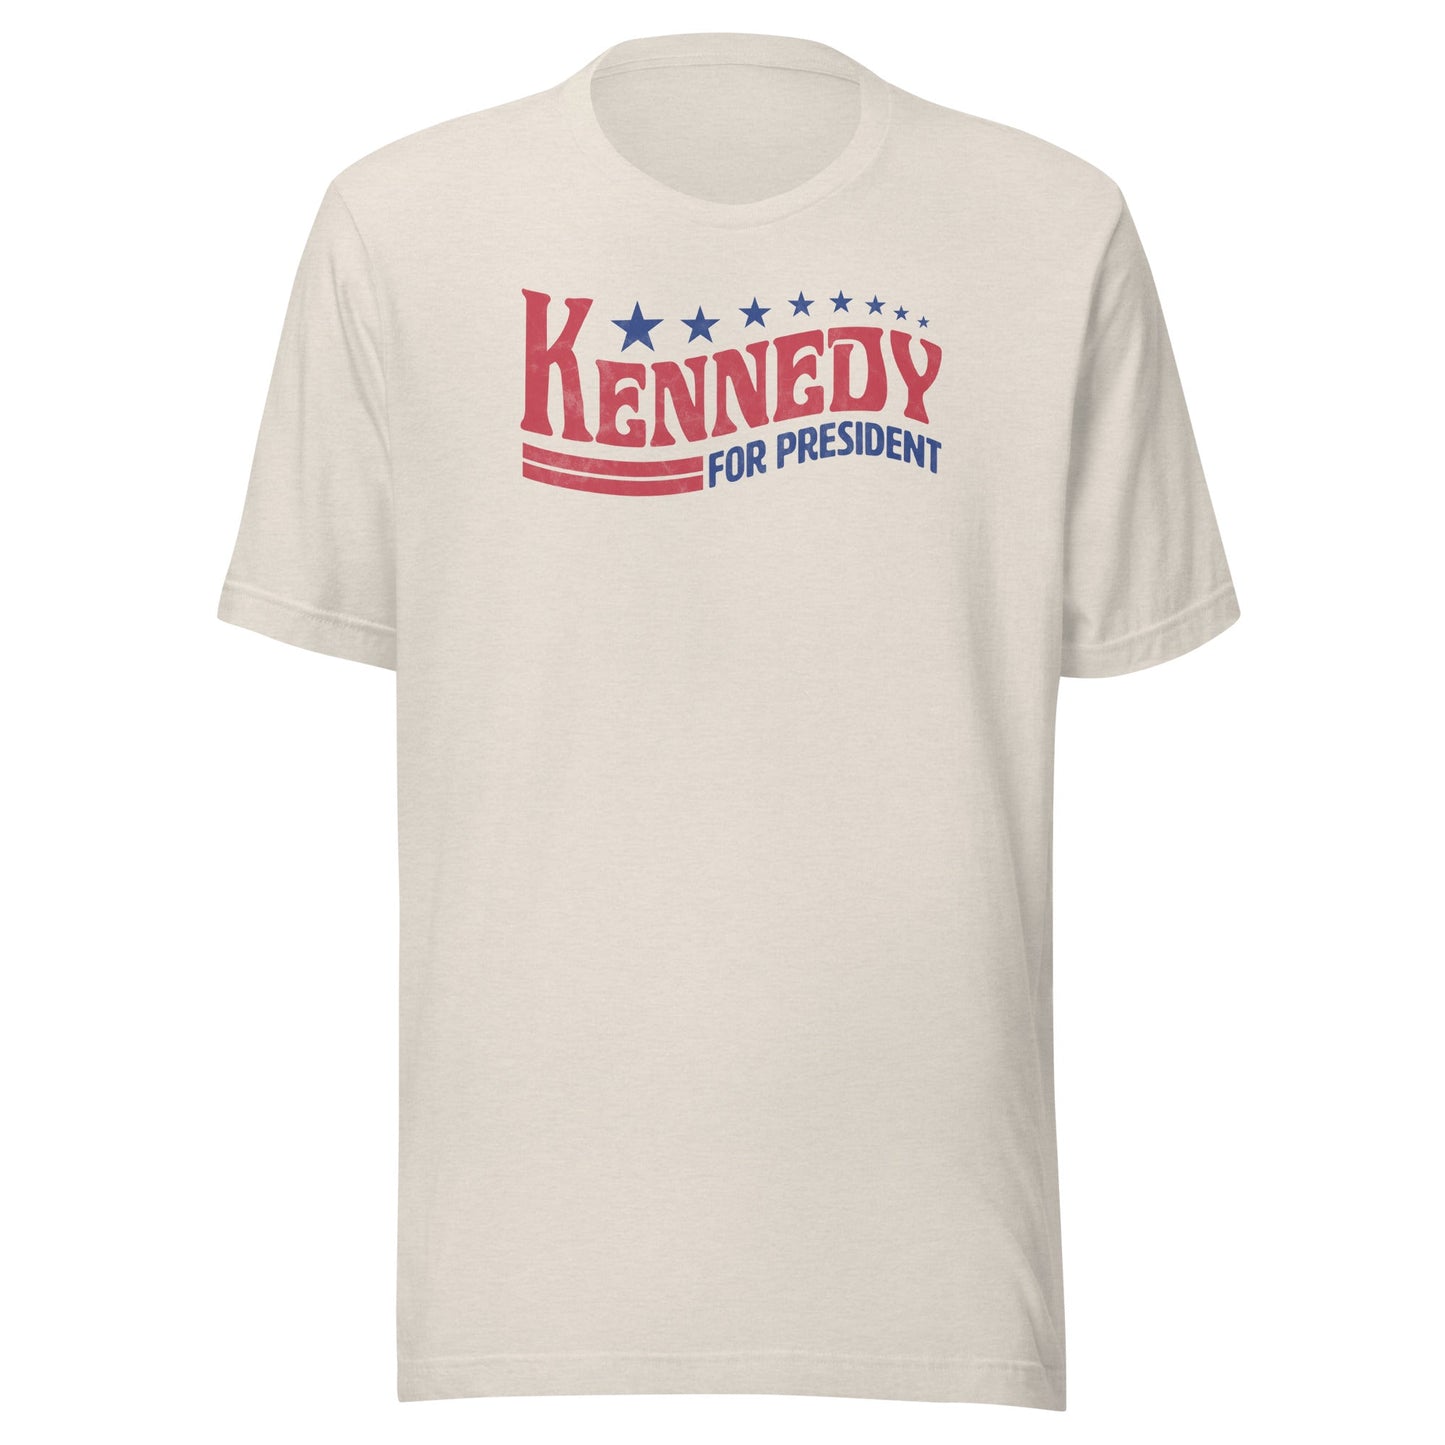 Kennedy for President Vintage Unisex Tee - TEAM KENNEDY. All rights reserved